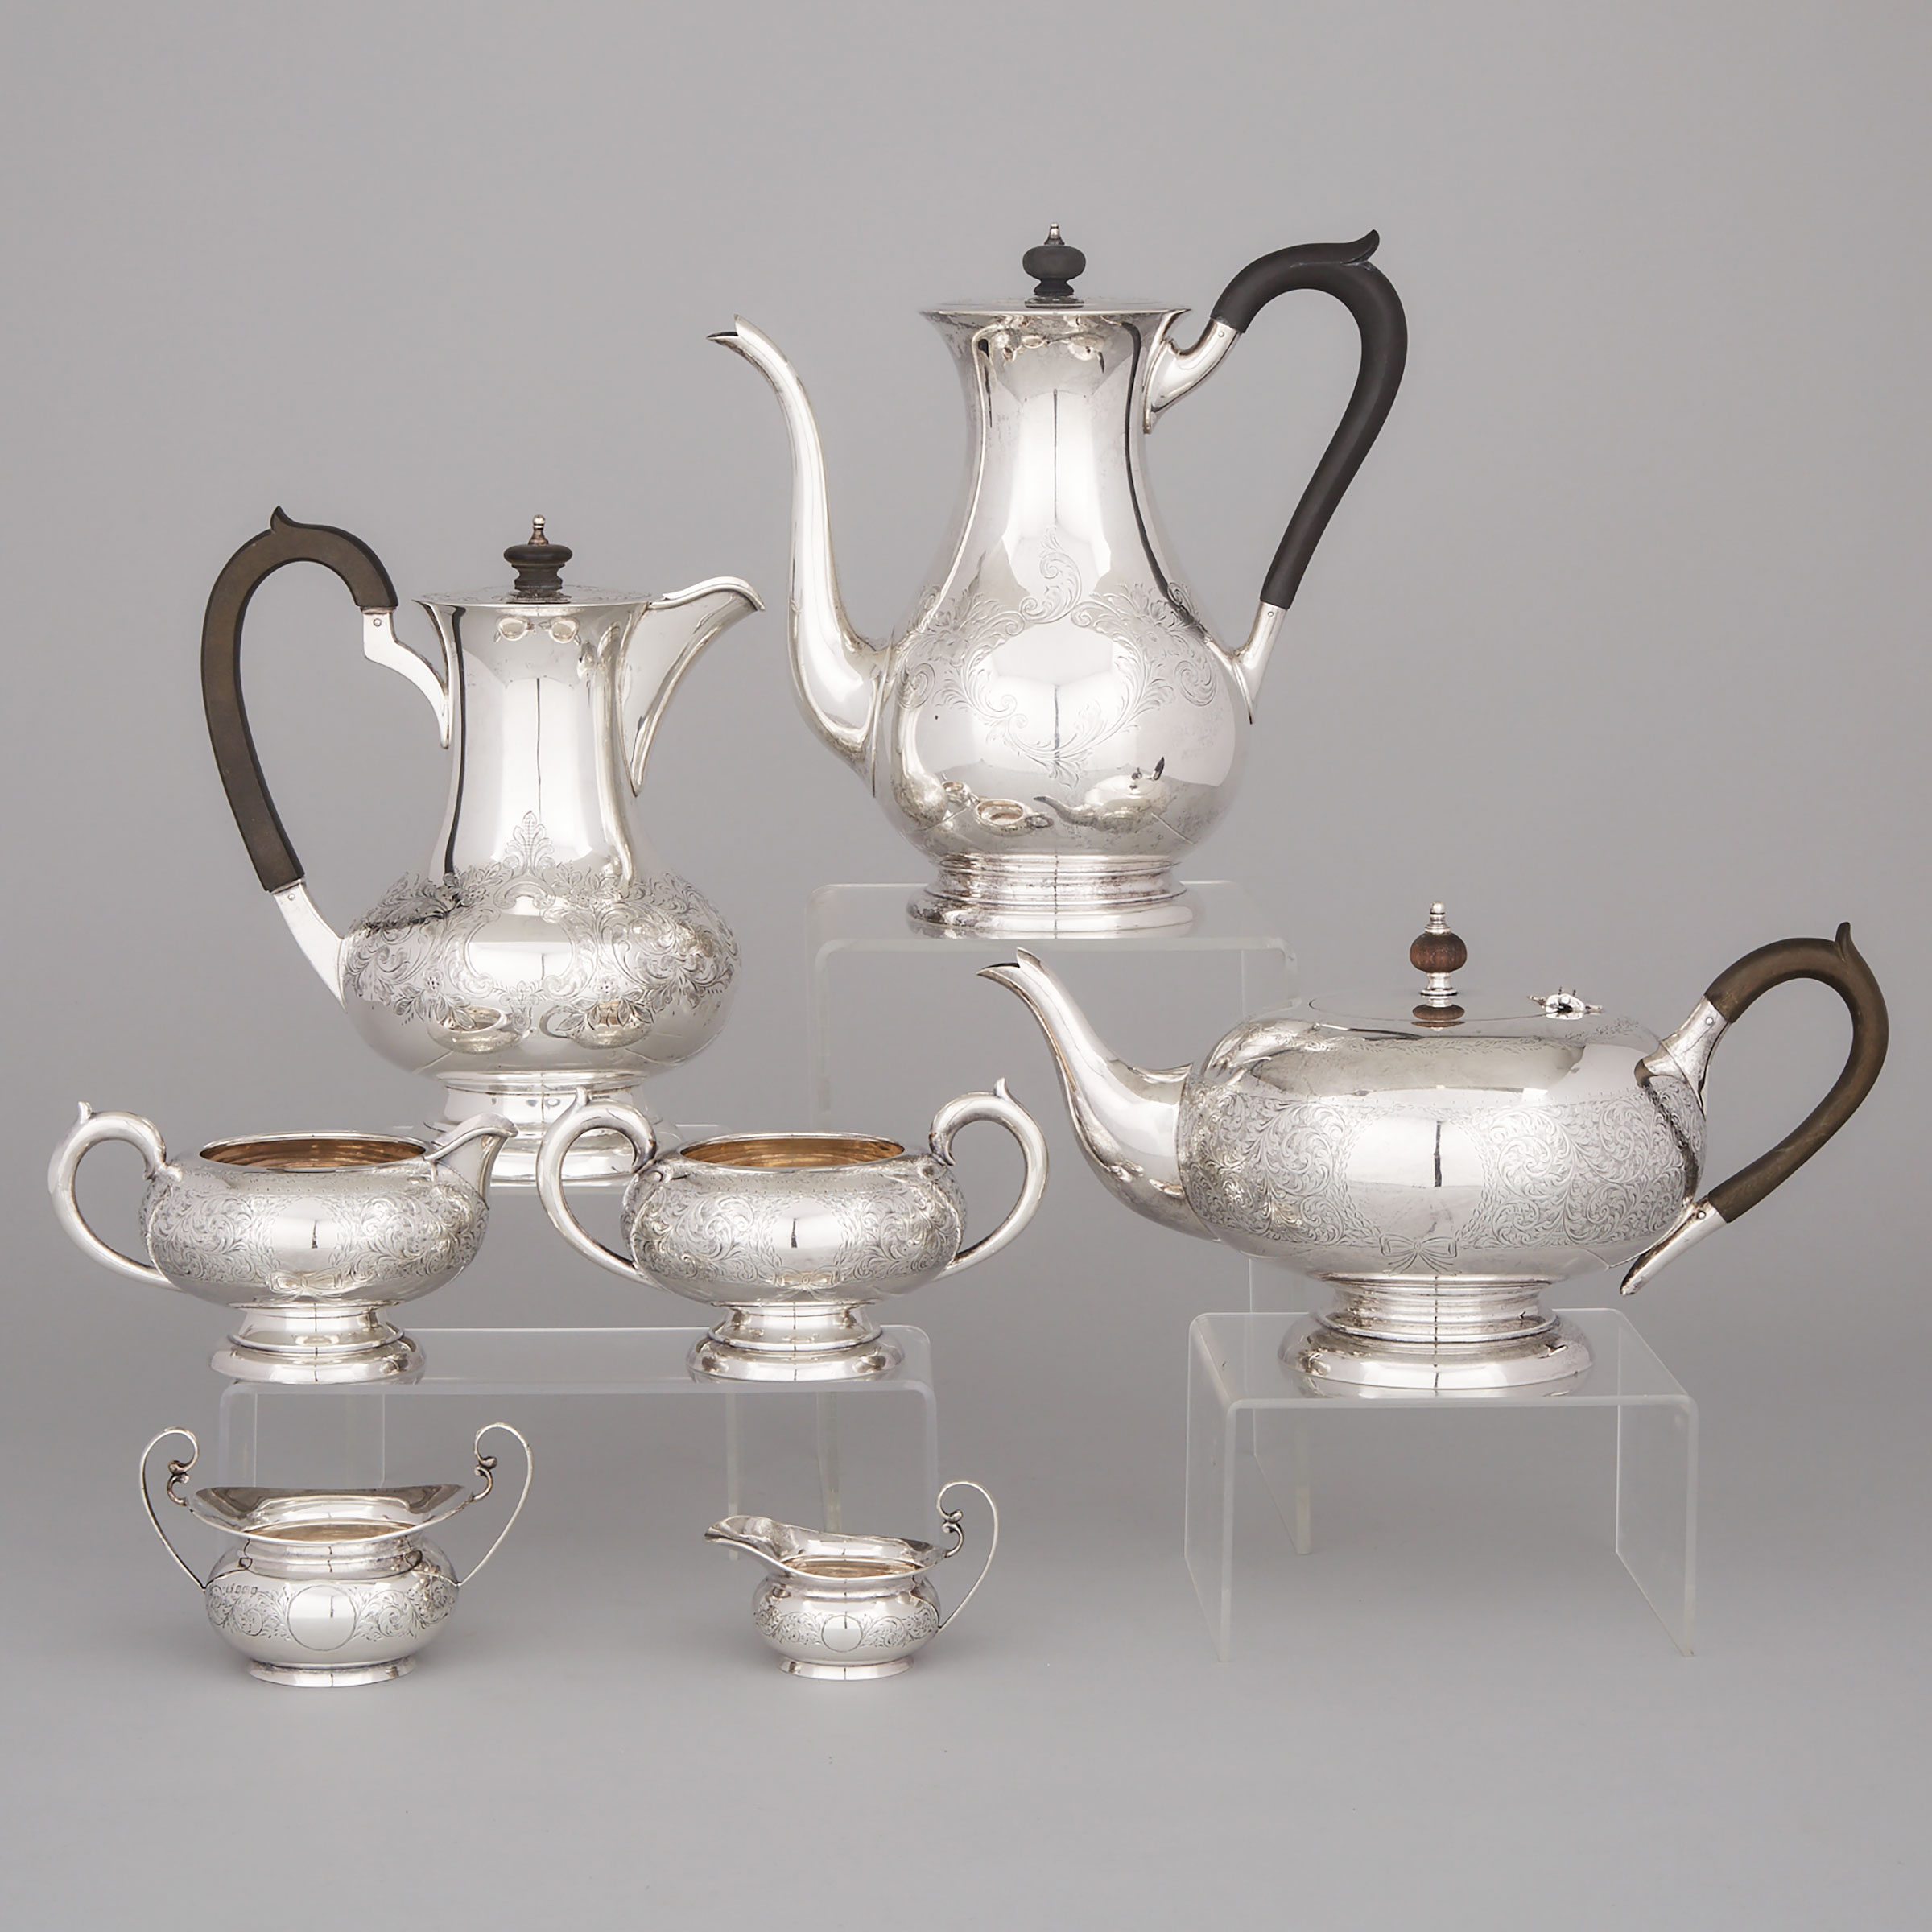 Assembled Canadian and English Silver Tea and Coffee Service, early 20th century